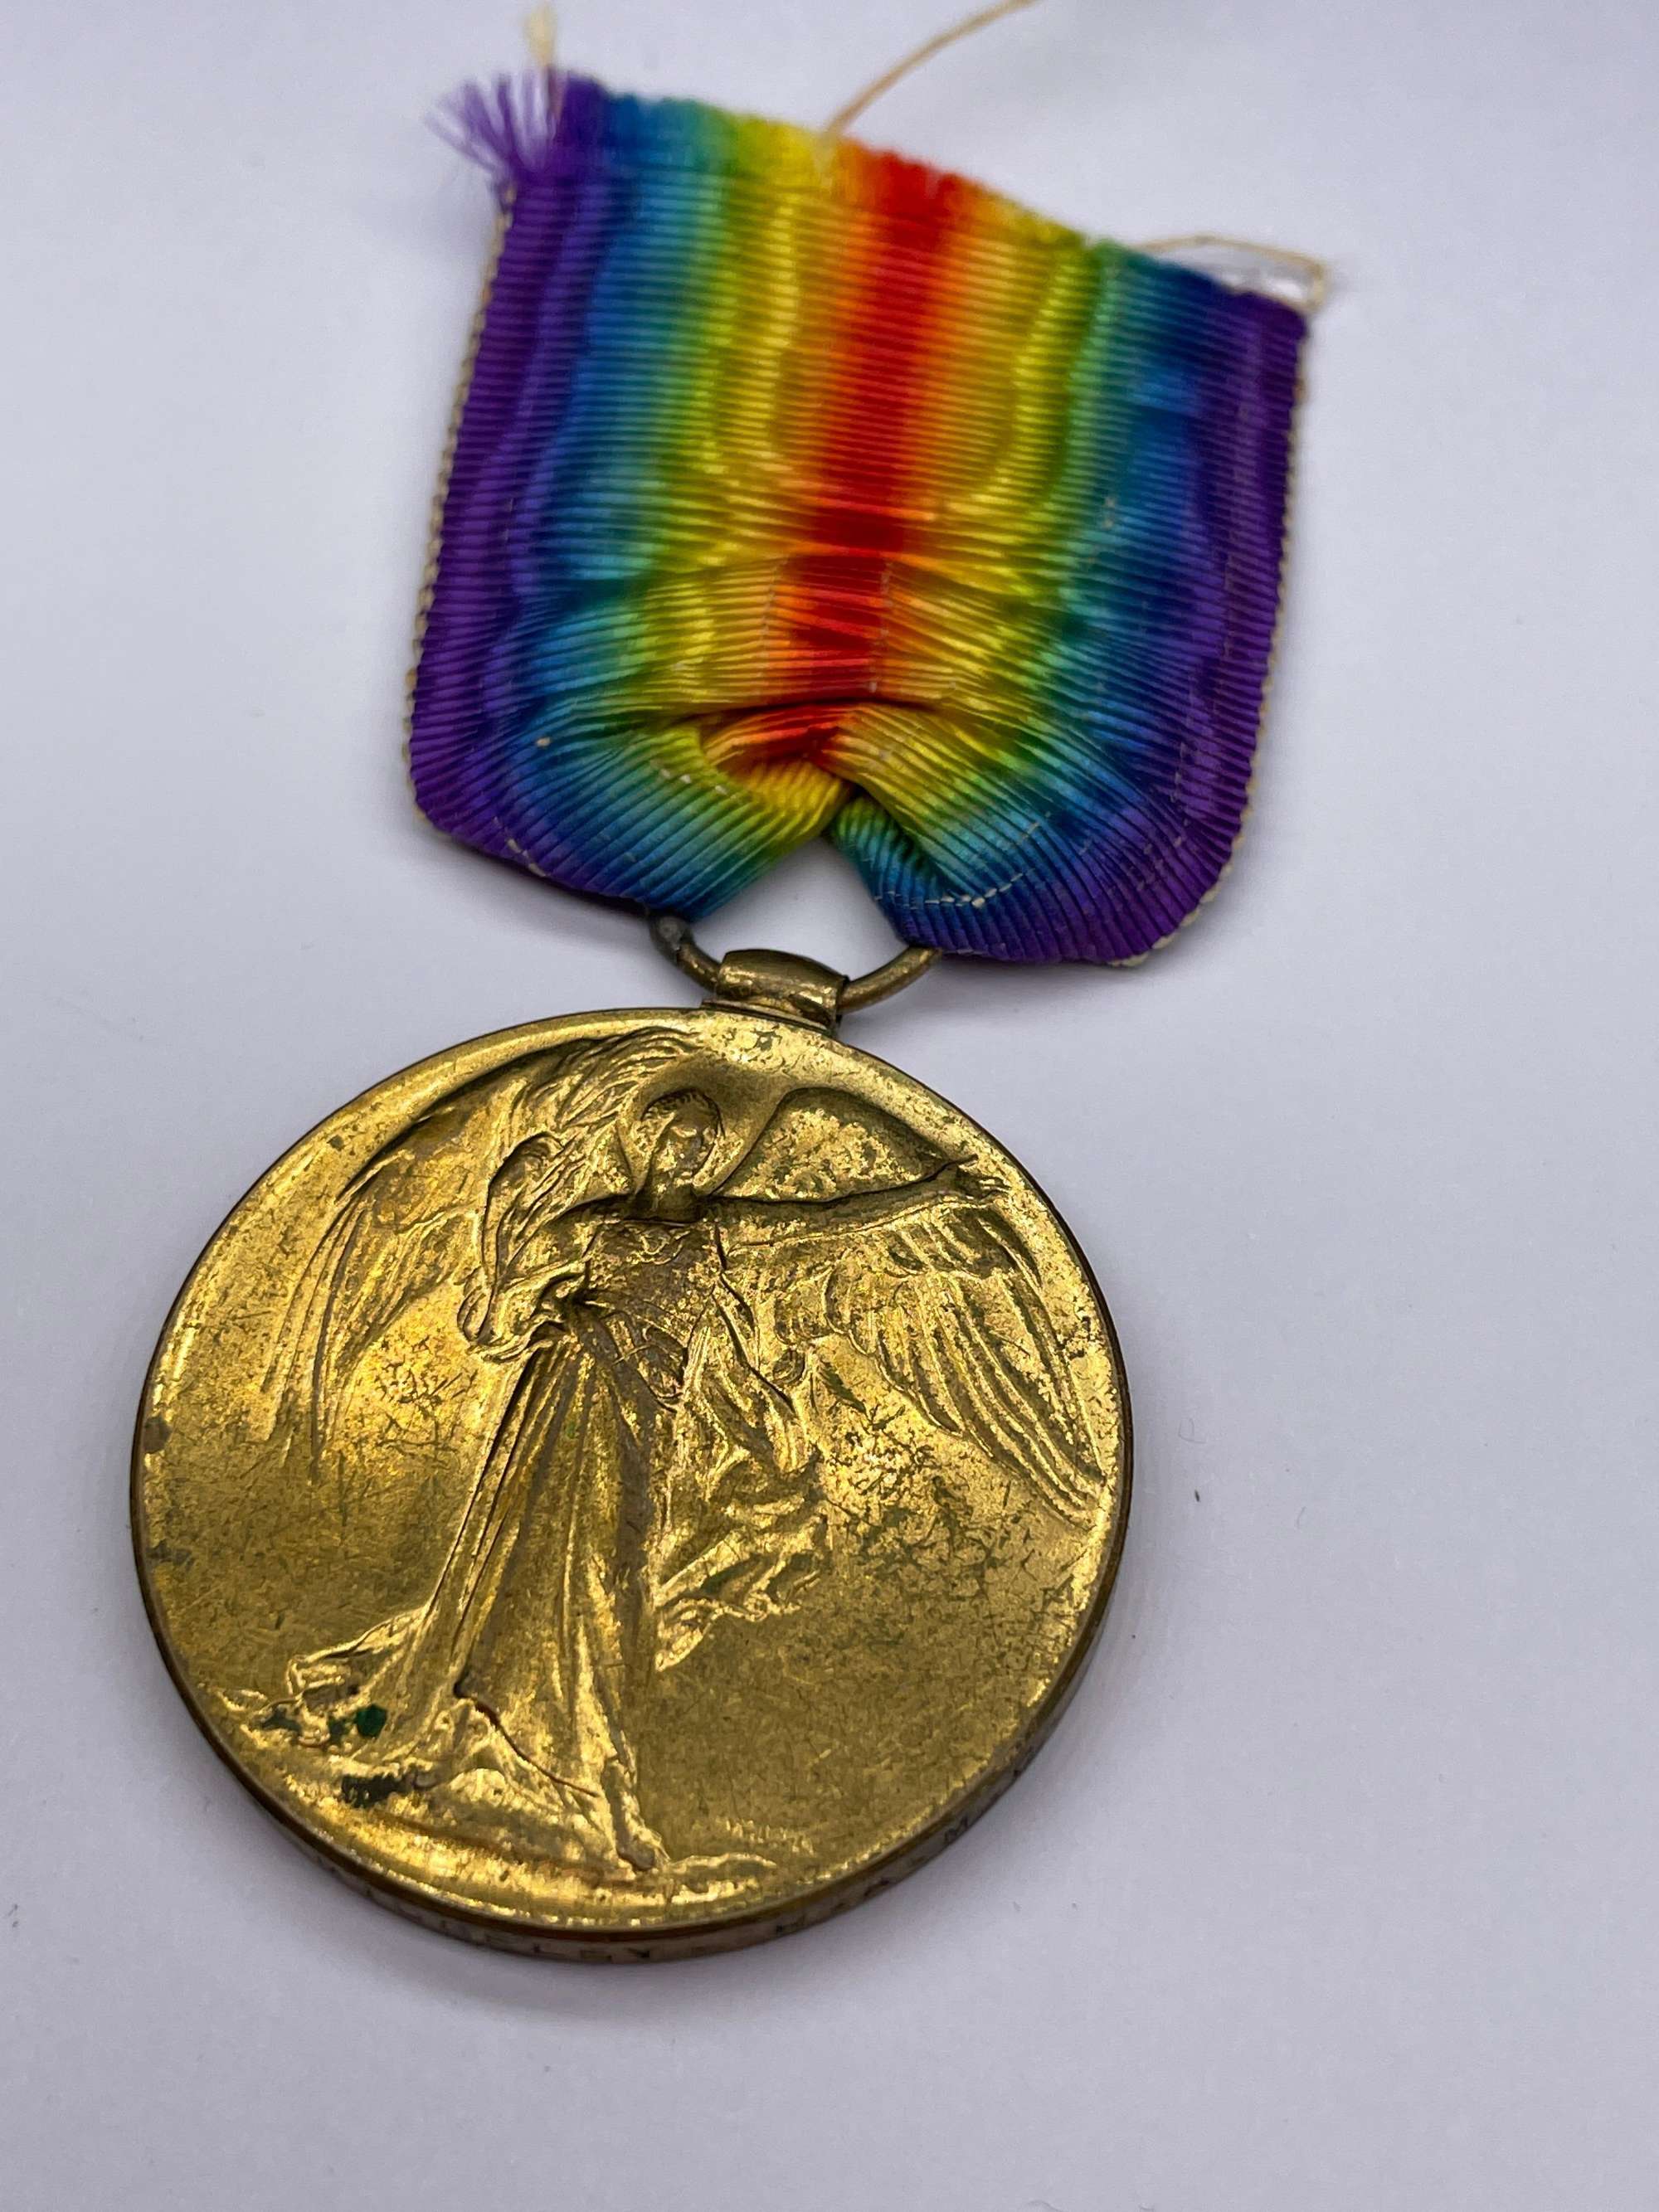 Original World War One Victory Medal, Pte Midgeley, Royal Army Medical Corps